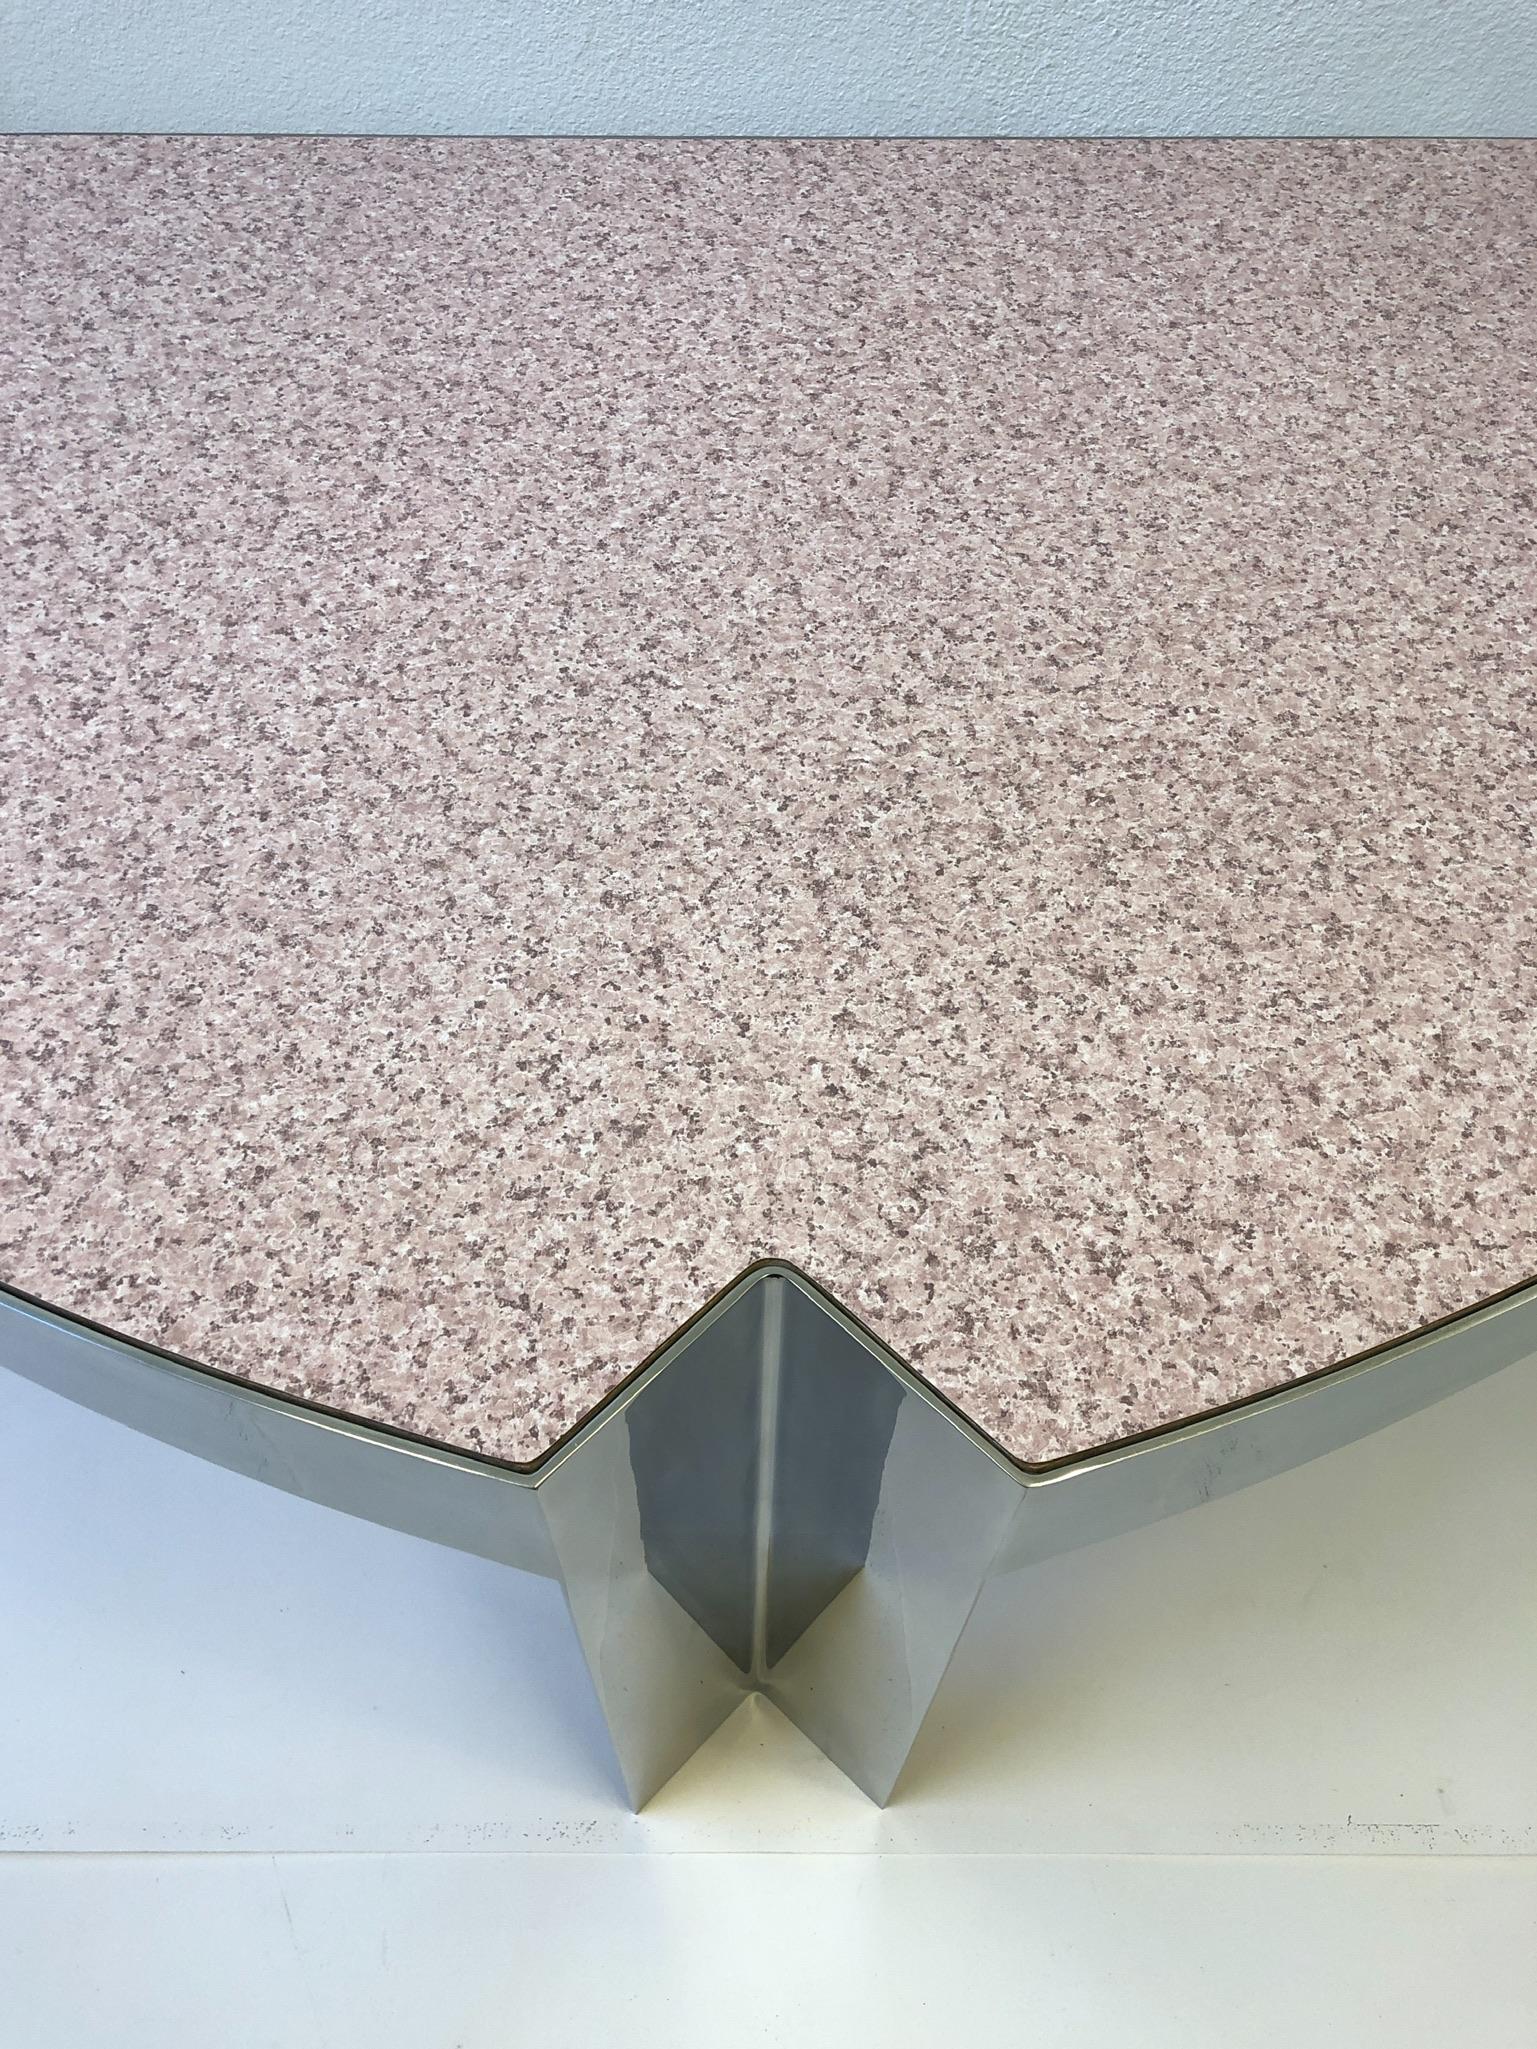 Polished Polish Aluminum and Pink Granite Formica Desk by Leon Rosen for Pace Collection